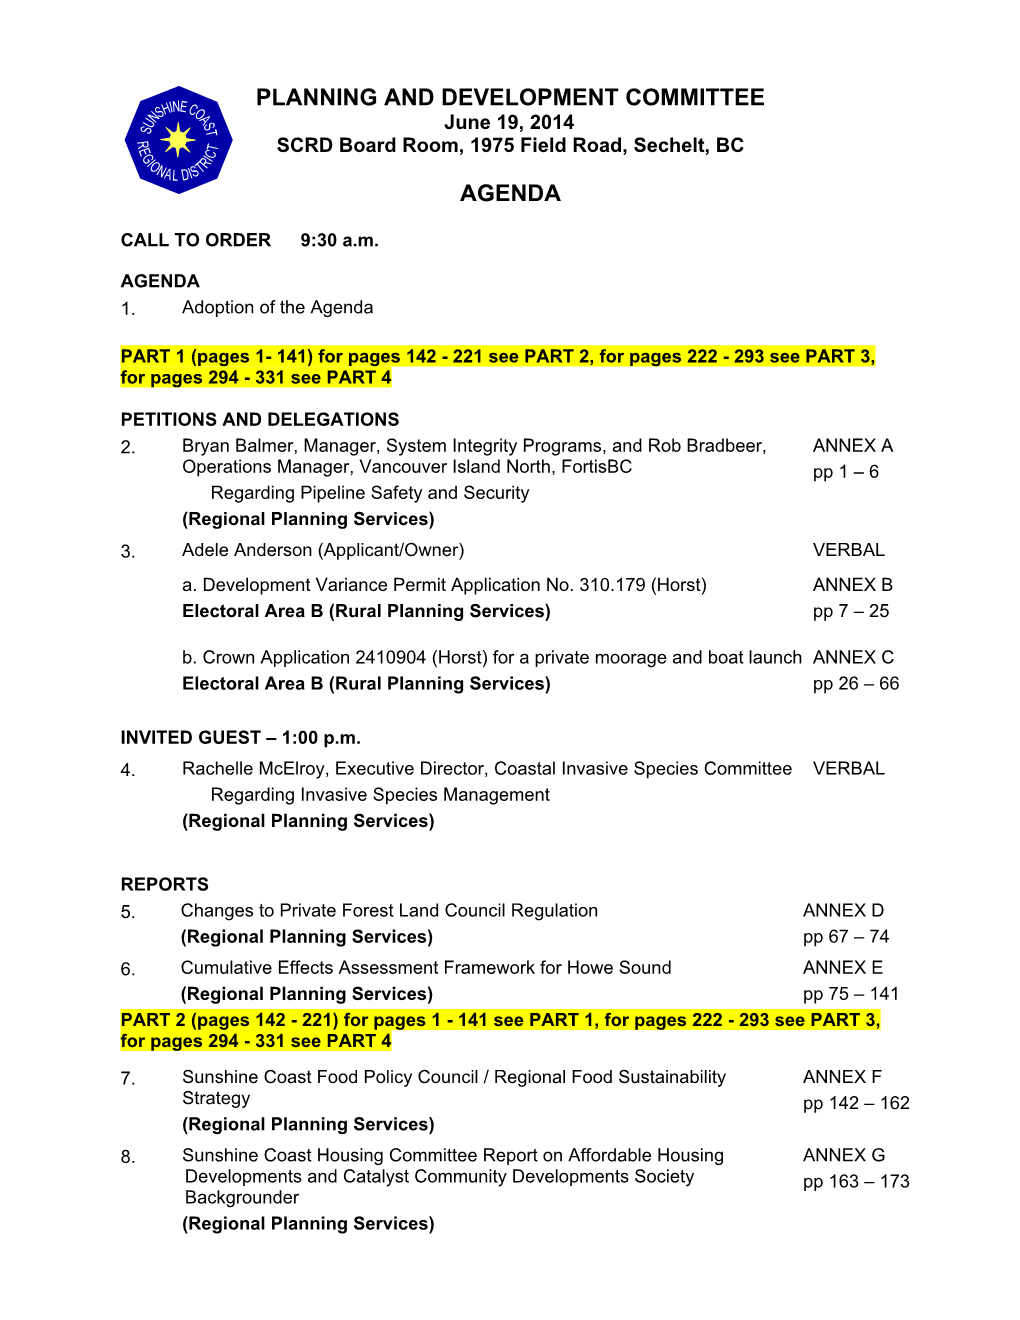 Planning and Development Committee Agenda - Thursday, June 19, 2014 Page 2 of 3